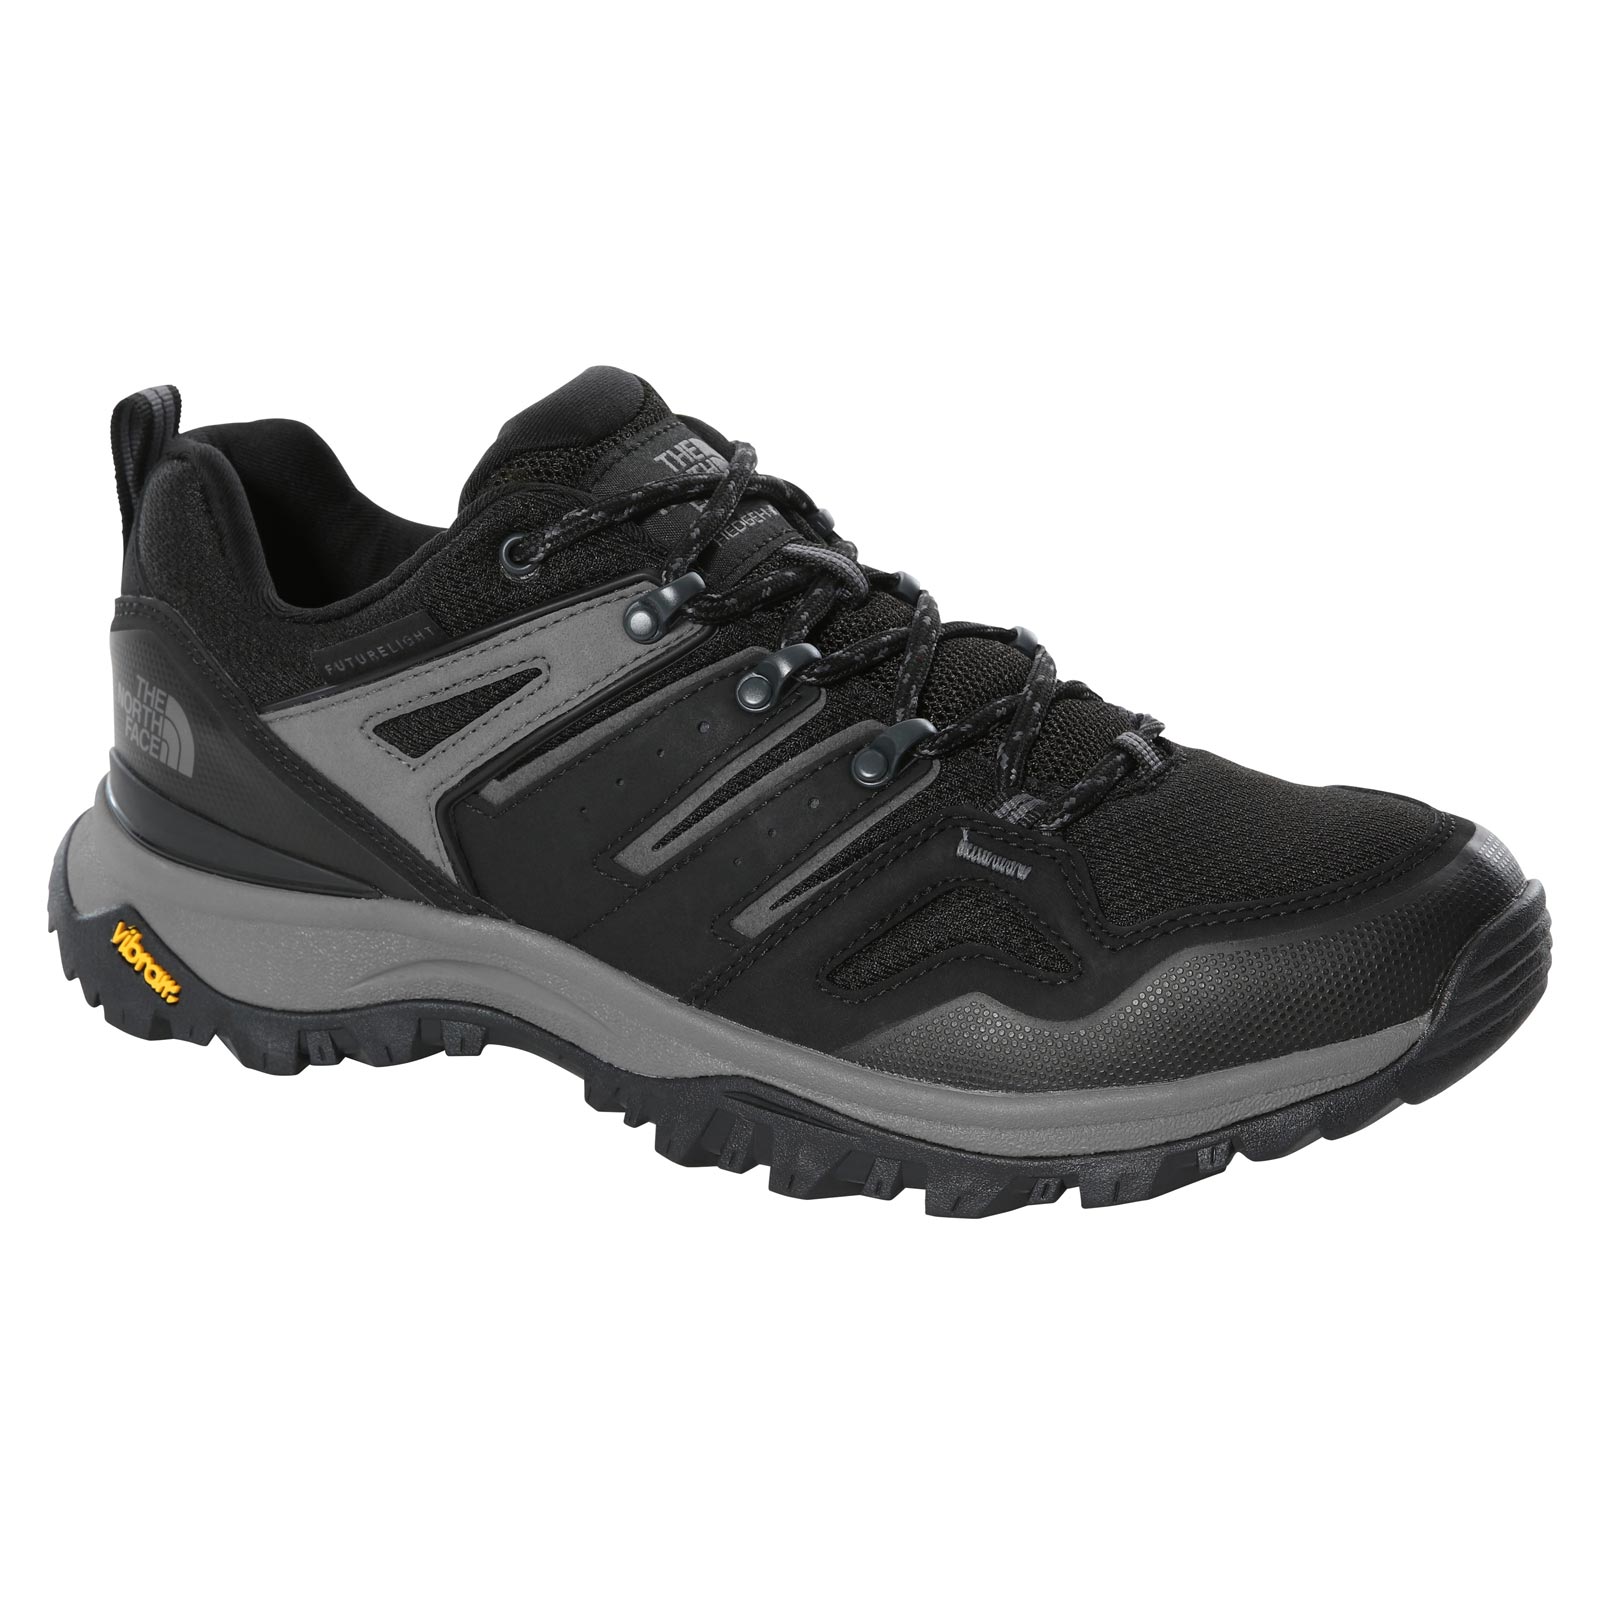 THE NORTH FACE HEDGEHOG FUTURELIGHT MENS WALKING SHOES